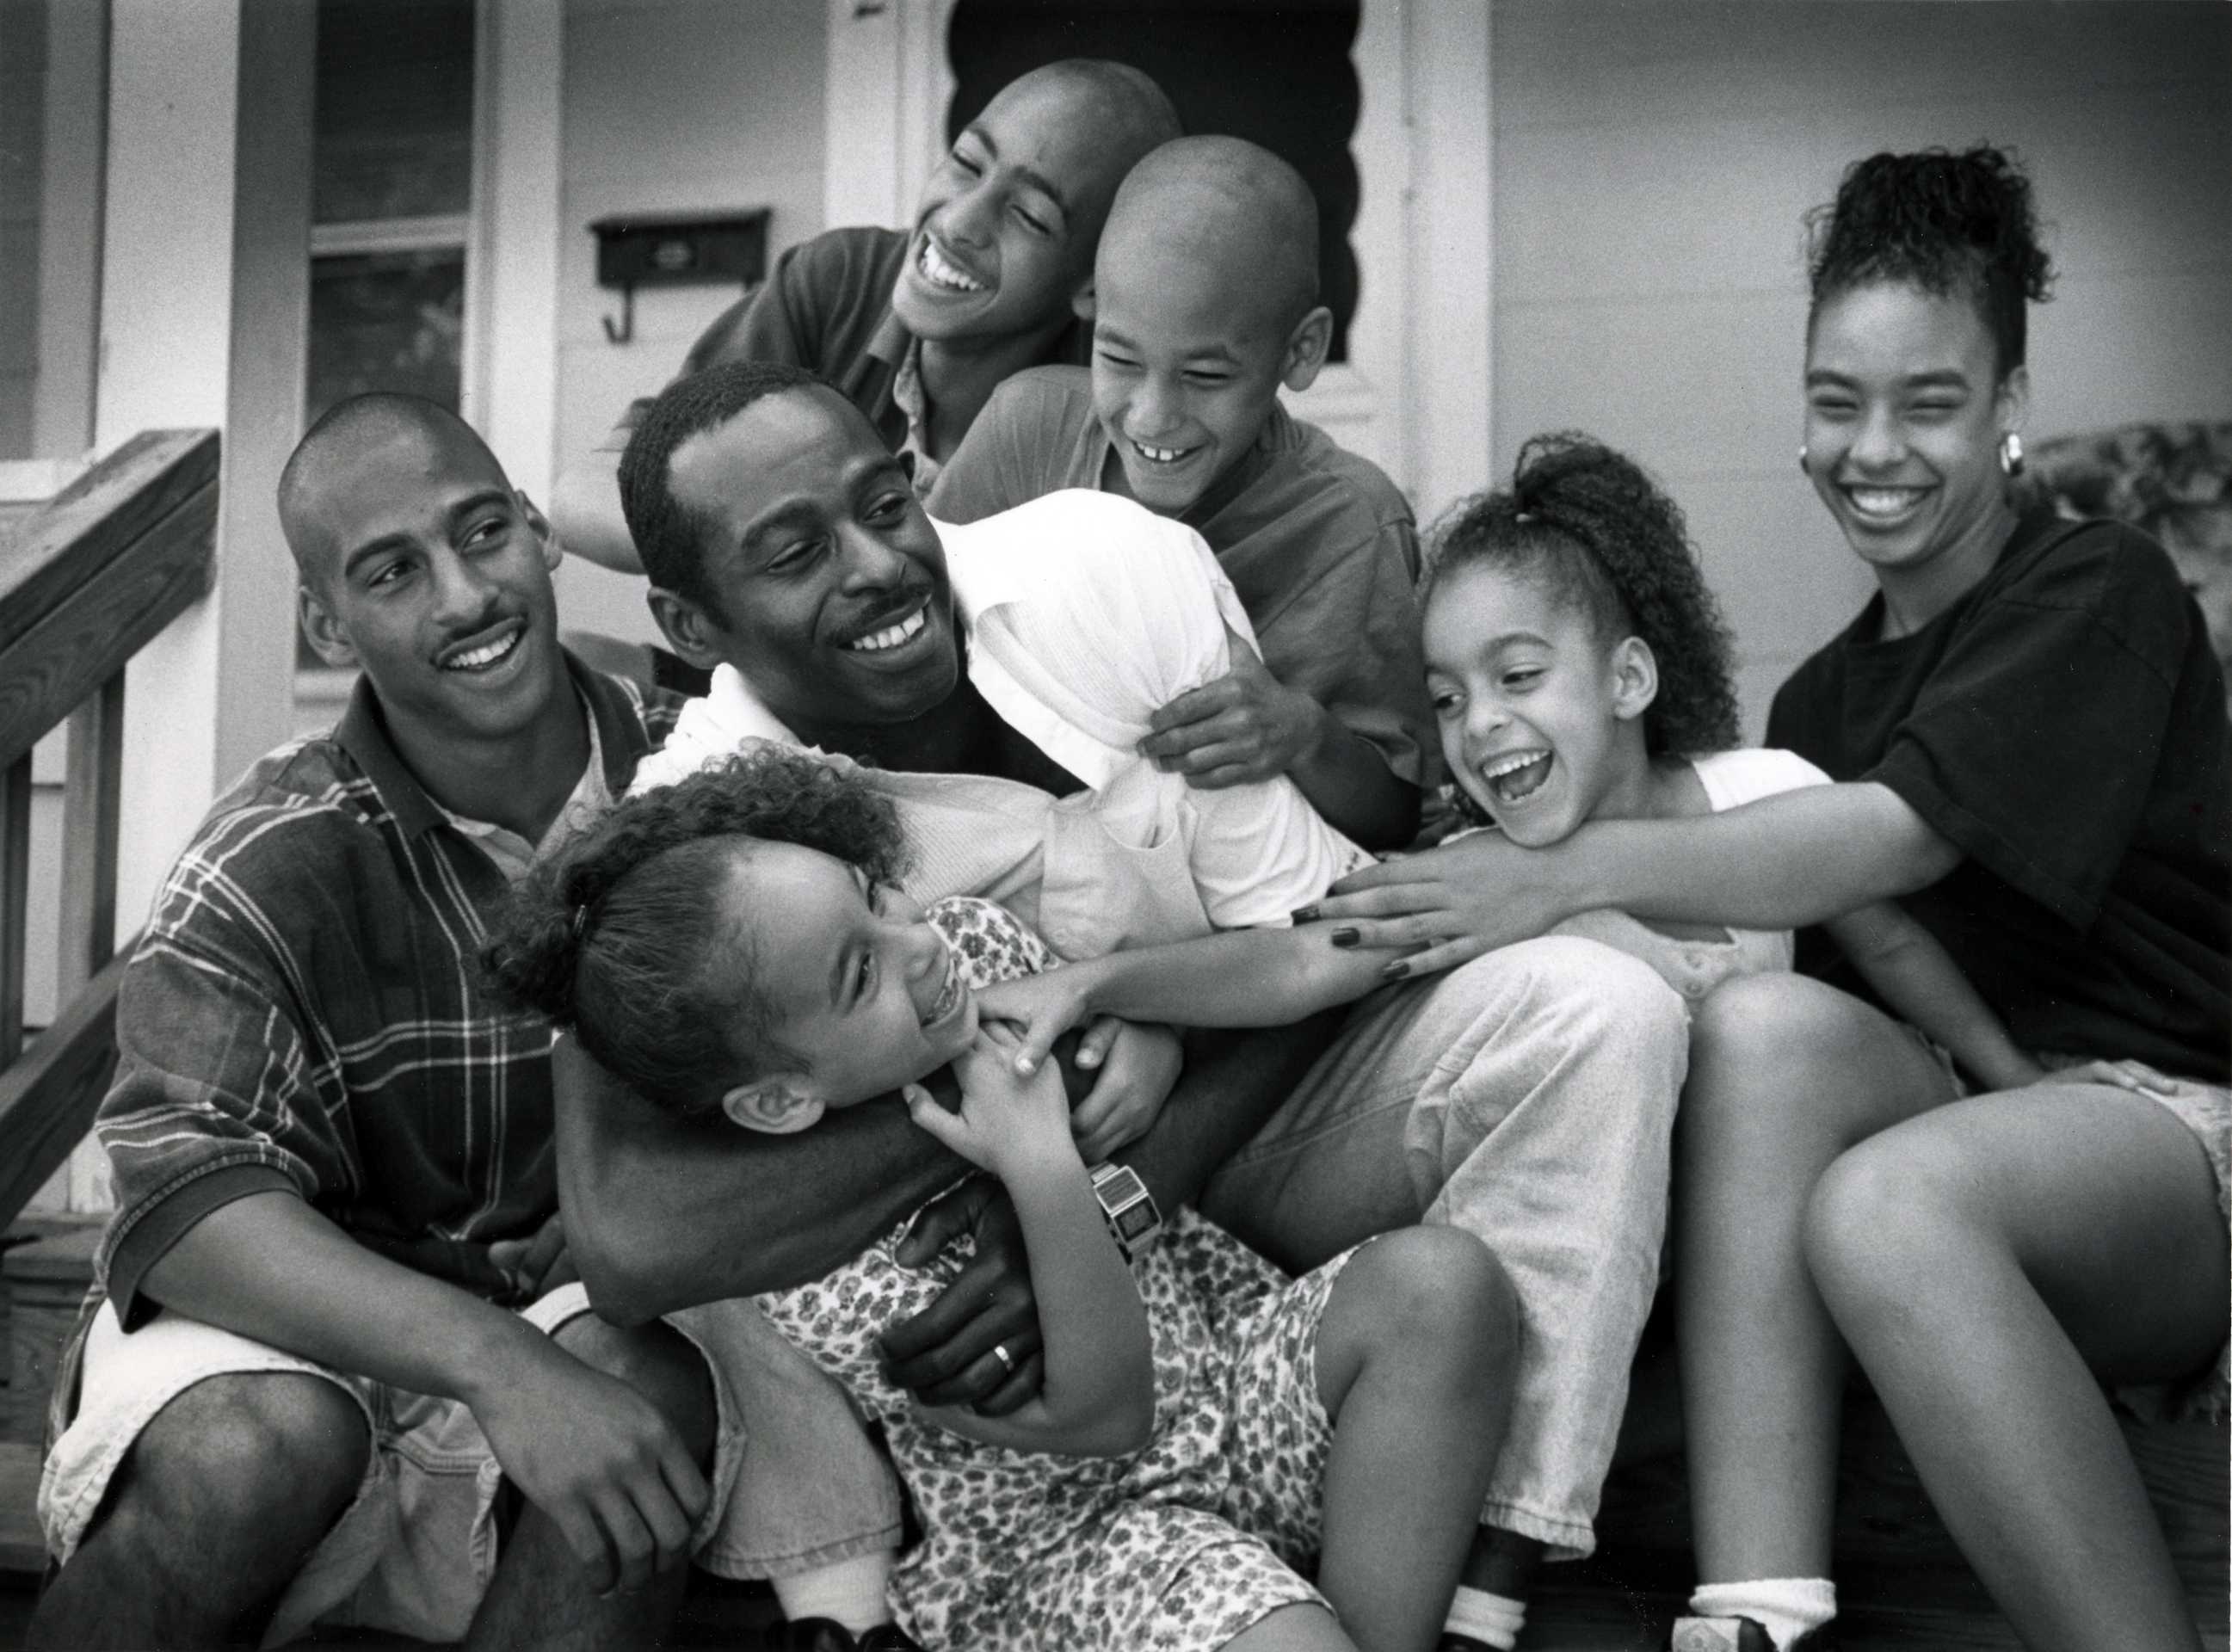 Leon O. Breece, 36, of Danbury, with his six children for a Father’s Day photo essay. 1995.